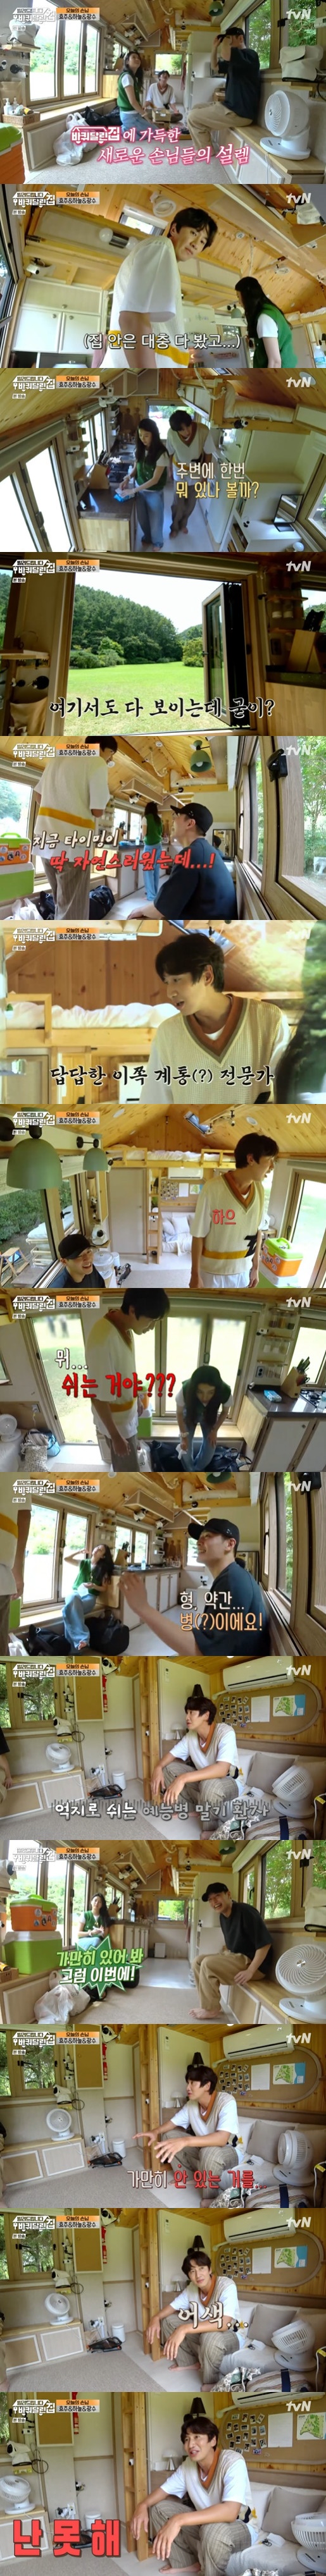 In The Wheeled House, Actor Lee Kwang-soo laughed at the end of the entertainment bottle.In the first episode of the cable channel tvN I will rent a wheeled house broadcasted on the afternoon of the 13th, the first entry of the camping car of Kang Ha-neul, Han Hyo-joo and Lee Kwang-soo was drawn.Lee Kwang-soo looked around the wheeled house and suggested, Lets see whats around?Kang Ha-neul said, I am a solo entertainer, my brother is a little sick, and Han Hyo-joo also said, Lets take a break.Lee Kwang-soo then laughed, referring to Running Man, saying, Im not good at being still, Ive been doing it for 11 years.Han Hyo-joo repeatedly said, Then just stay put, dont do anything.Lee Kwang-soo was frustrated, If you do, you should just lie at home.Lee Kwang-soo also laughed at Mart as I was busy alone. Han Hyo-joo said, There is no mission to find something here quickly.I think Im very used to doing something. Lee Kwang-soo revealed his wit, Its an Occupational disease; I think Ill find bread quickly and be the first.